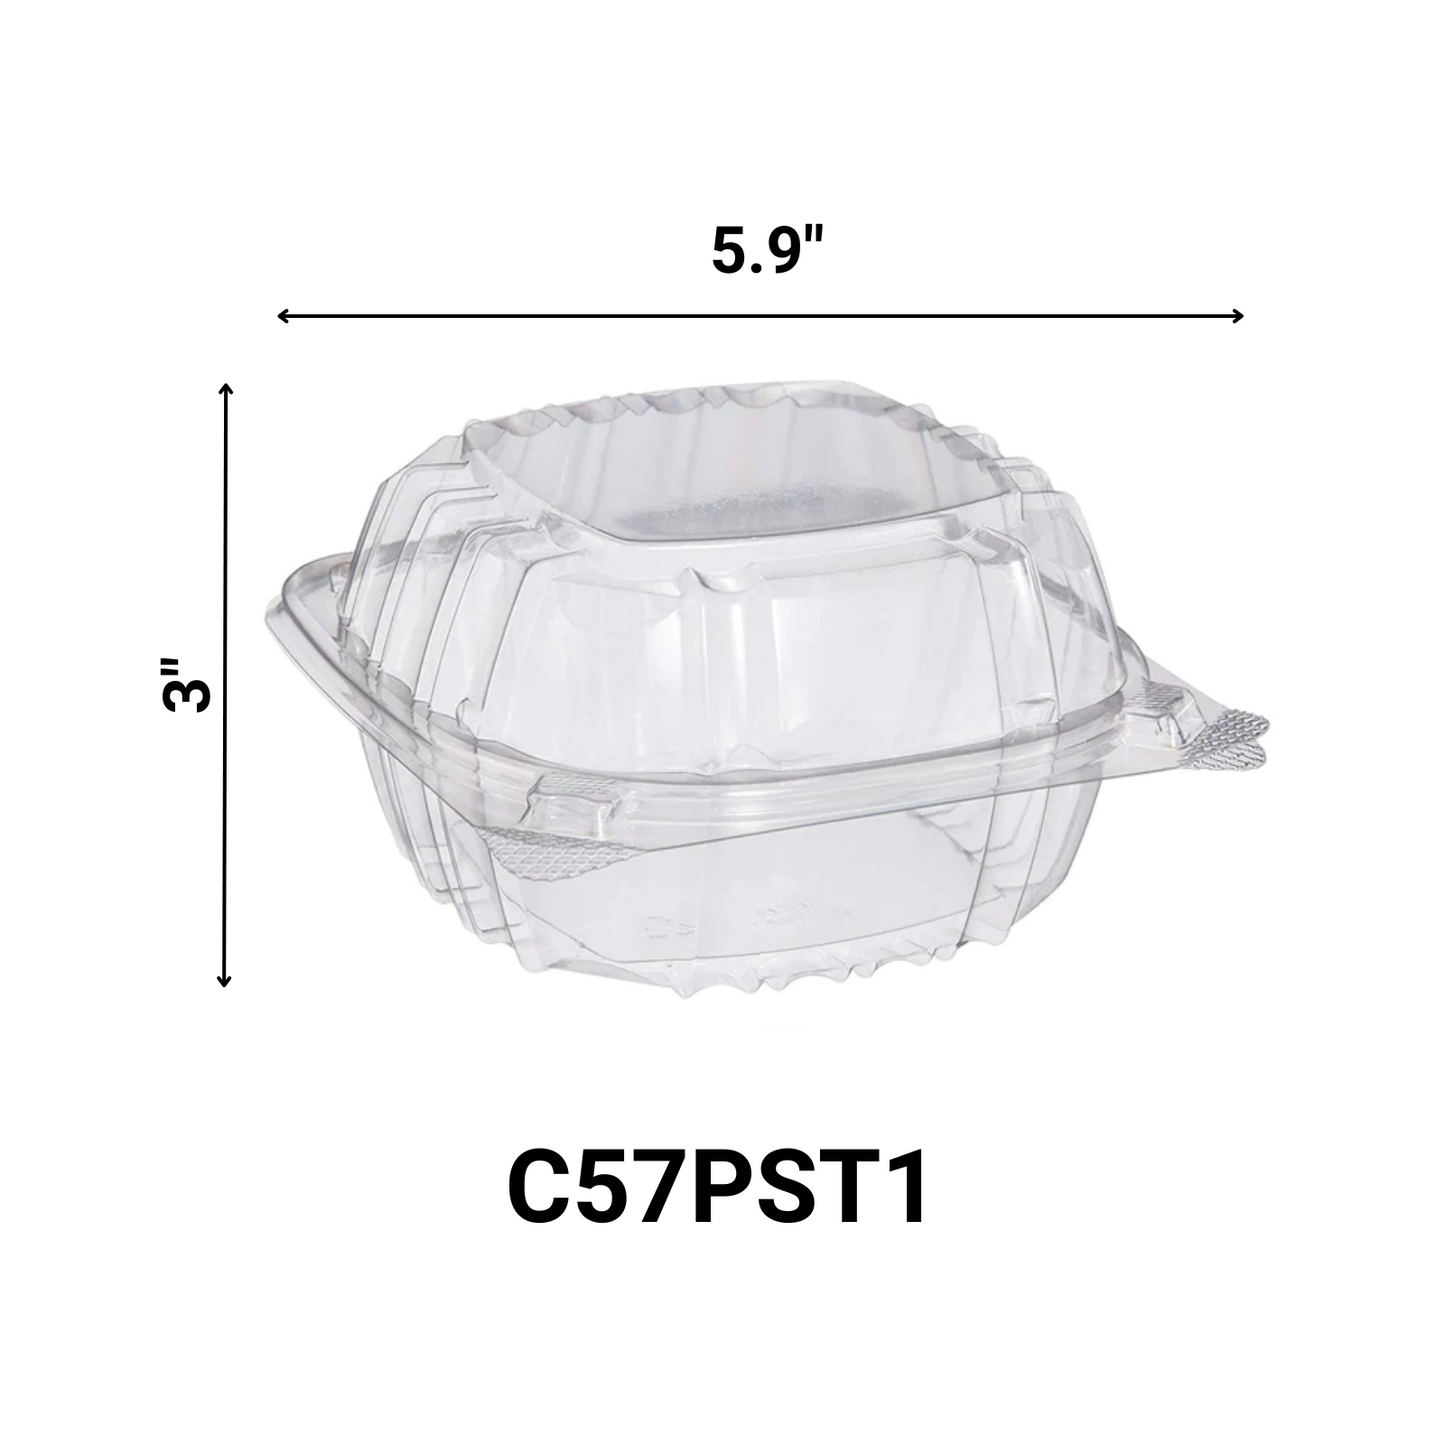 *WHOLESALE* DART Model # C57PST1| ClearSeal Hinged Lid Container | 500 ct/case Salad Containers Dart   